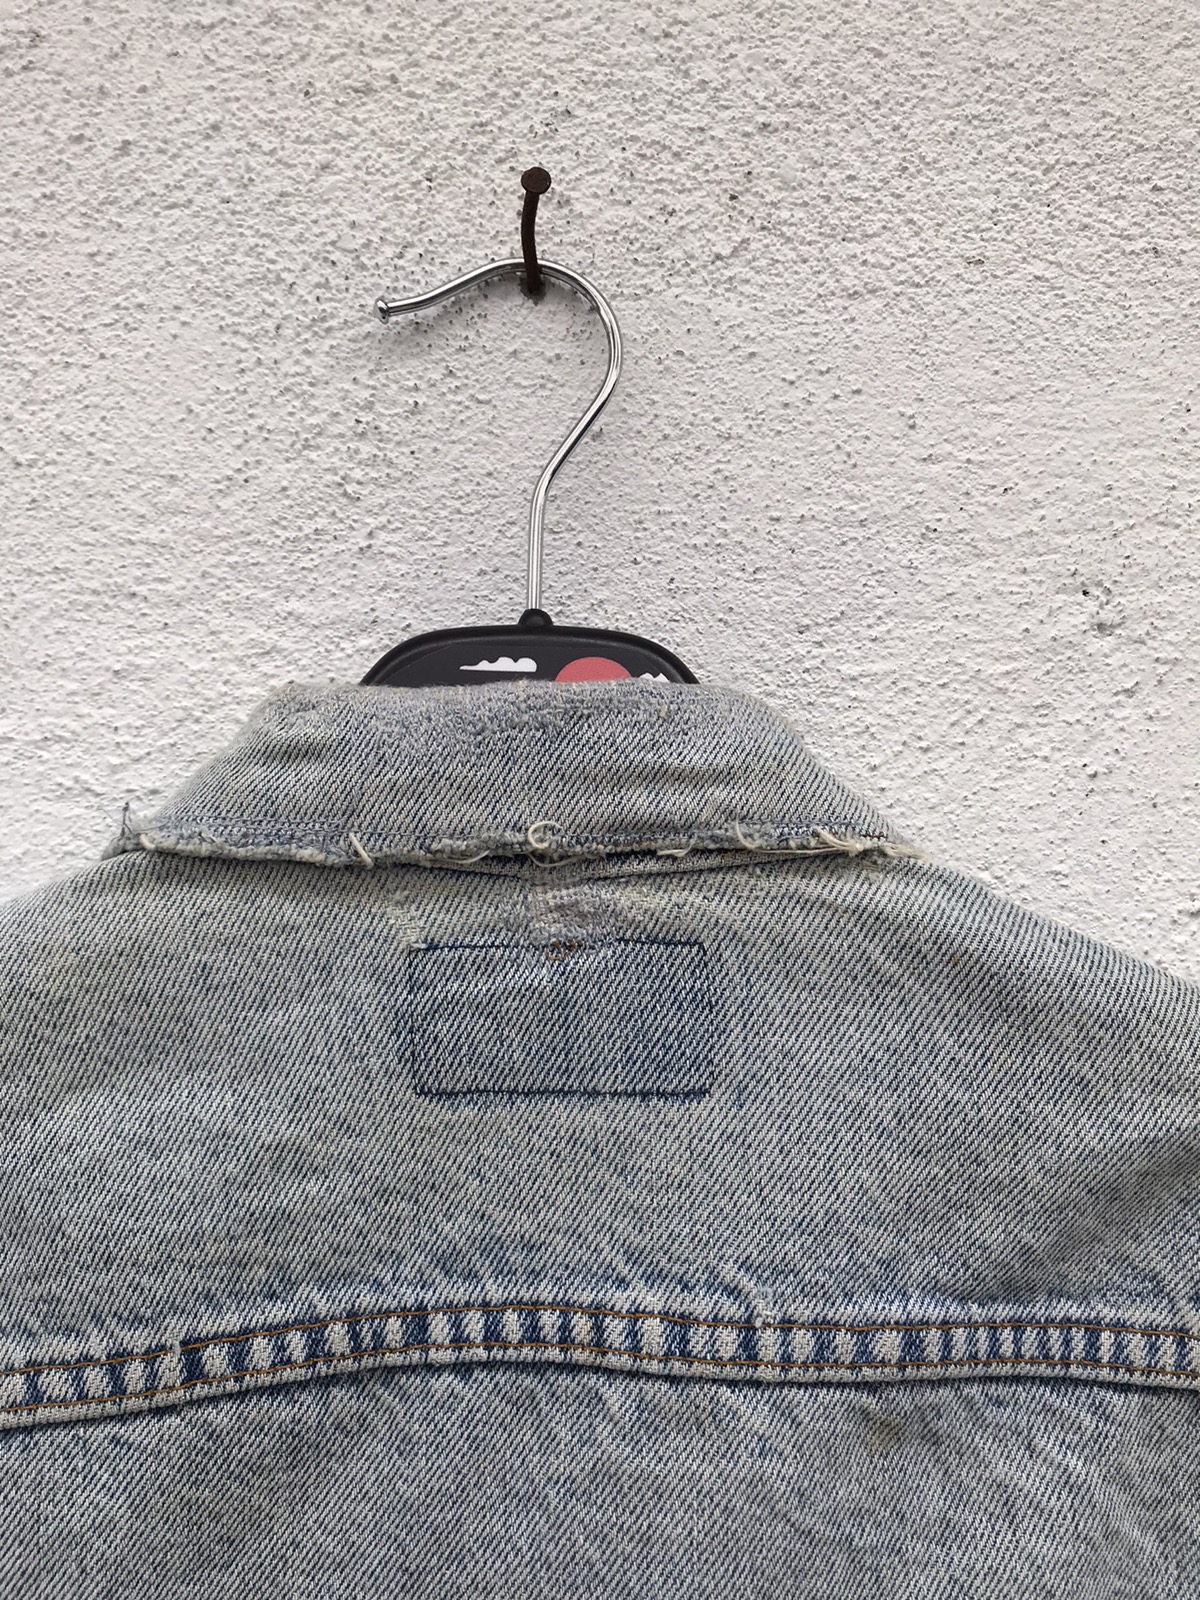 Made In Usa Levi’s Distressed Denim Jackets - 10